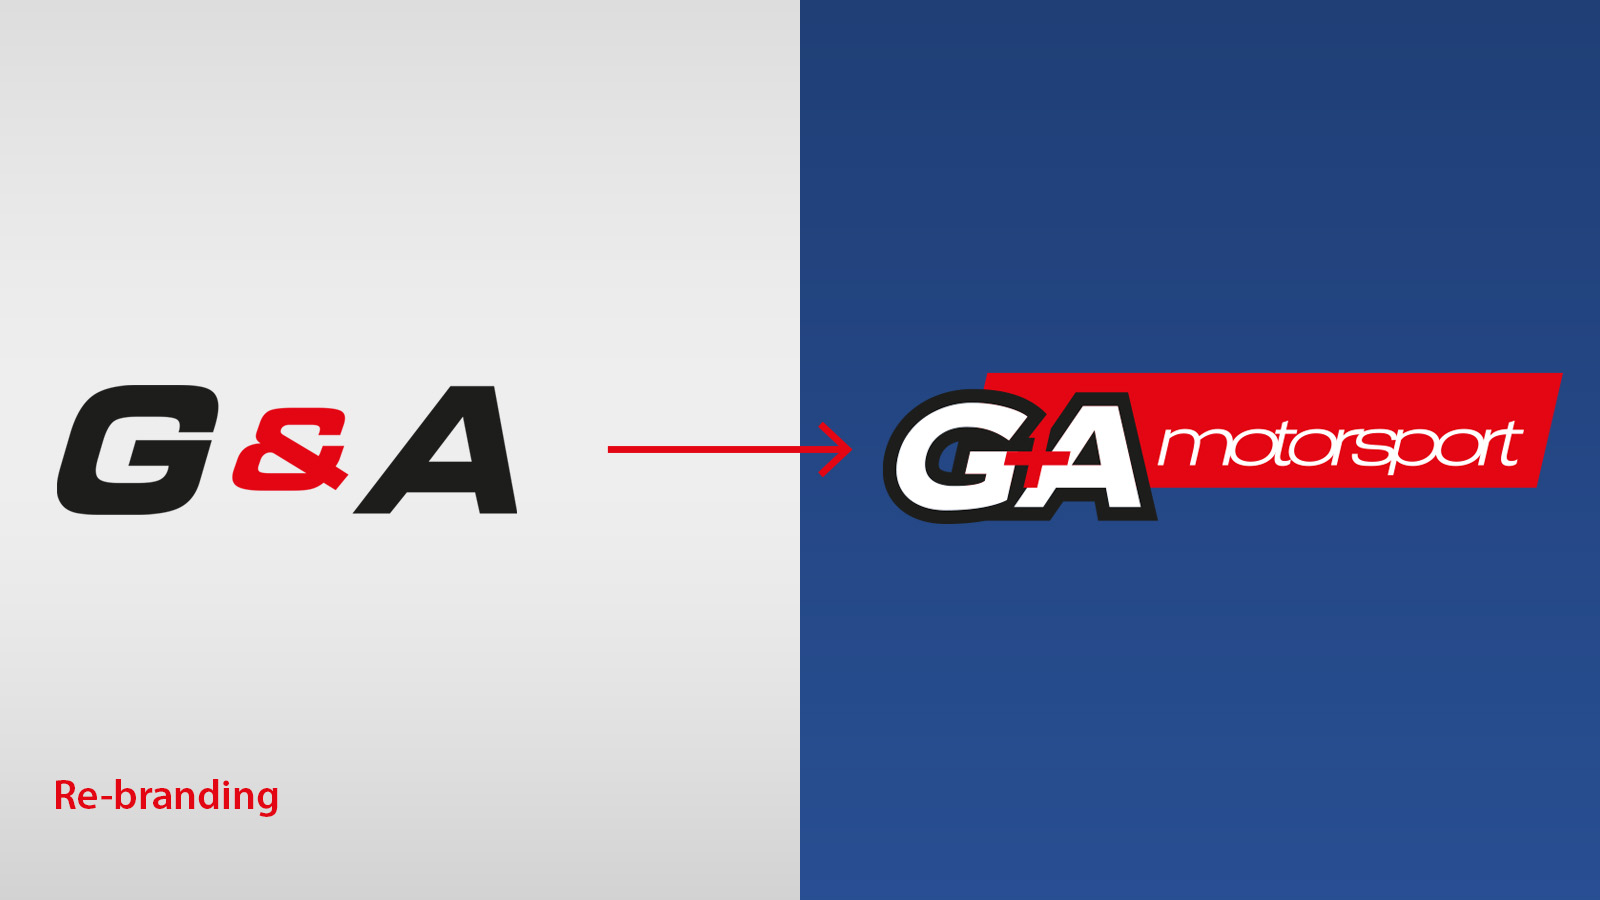 Graphic showing old G+A logo compared to refreshed G+A logo.